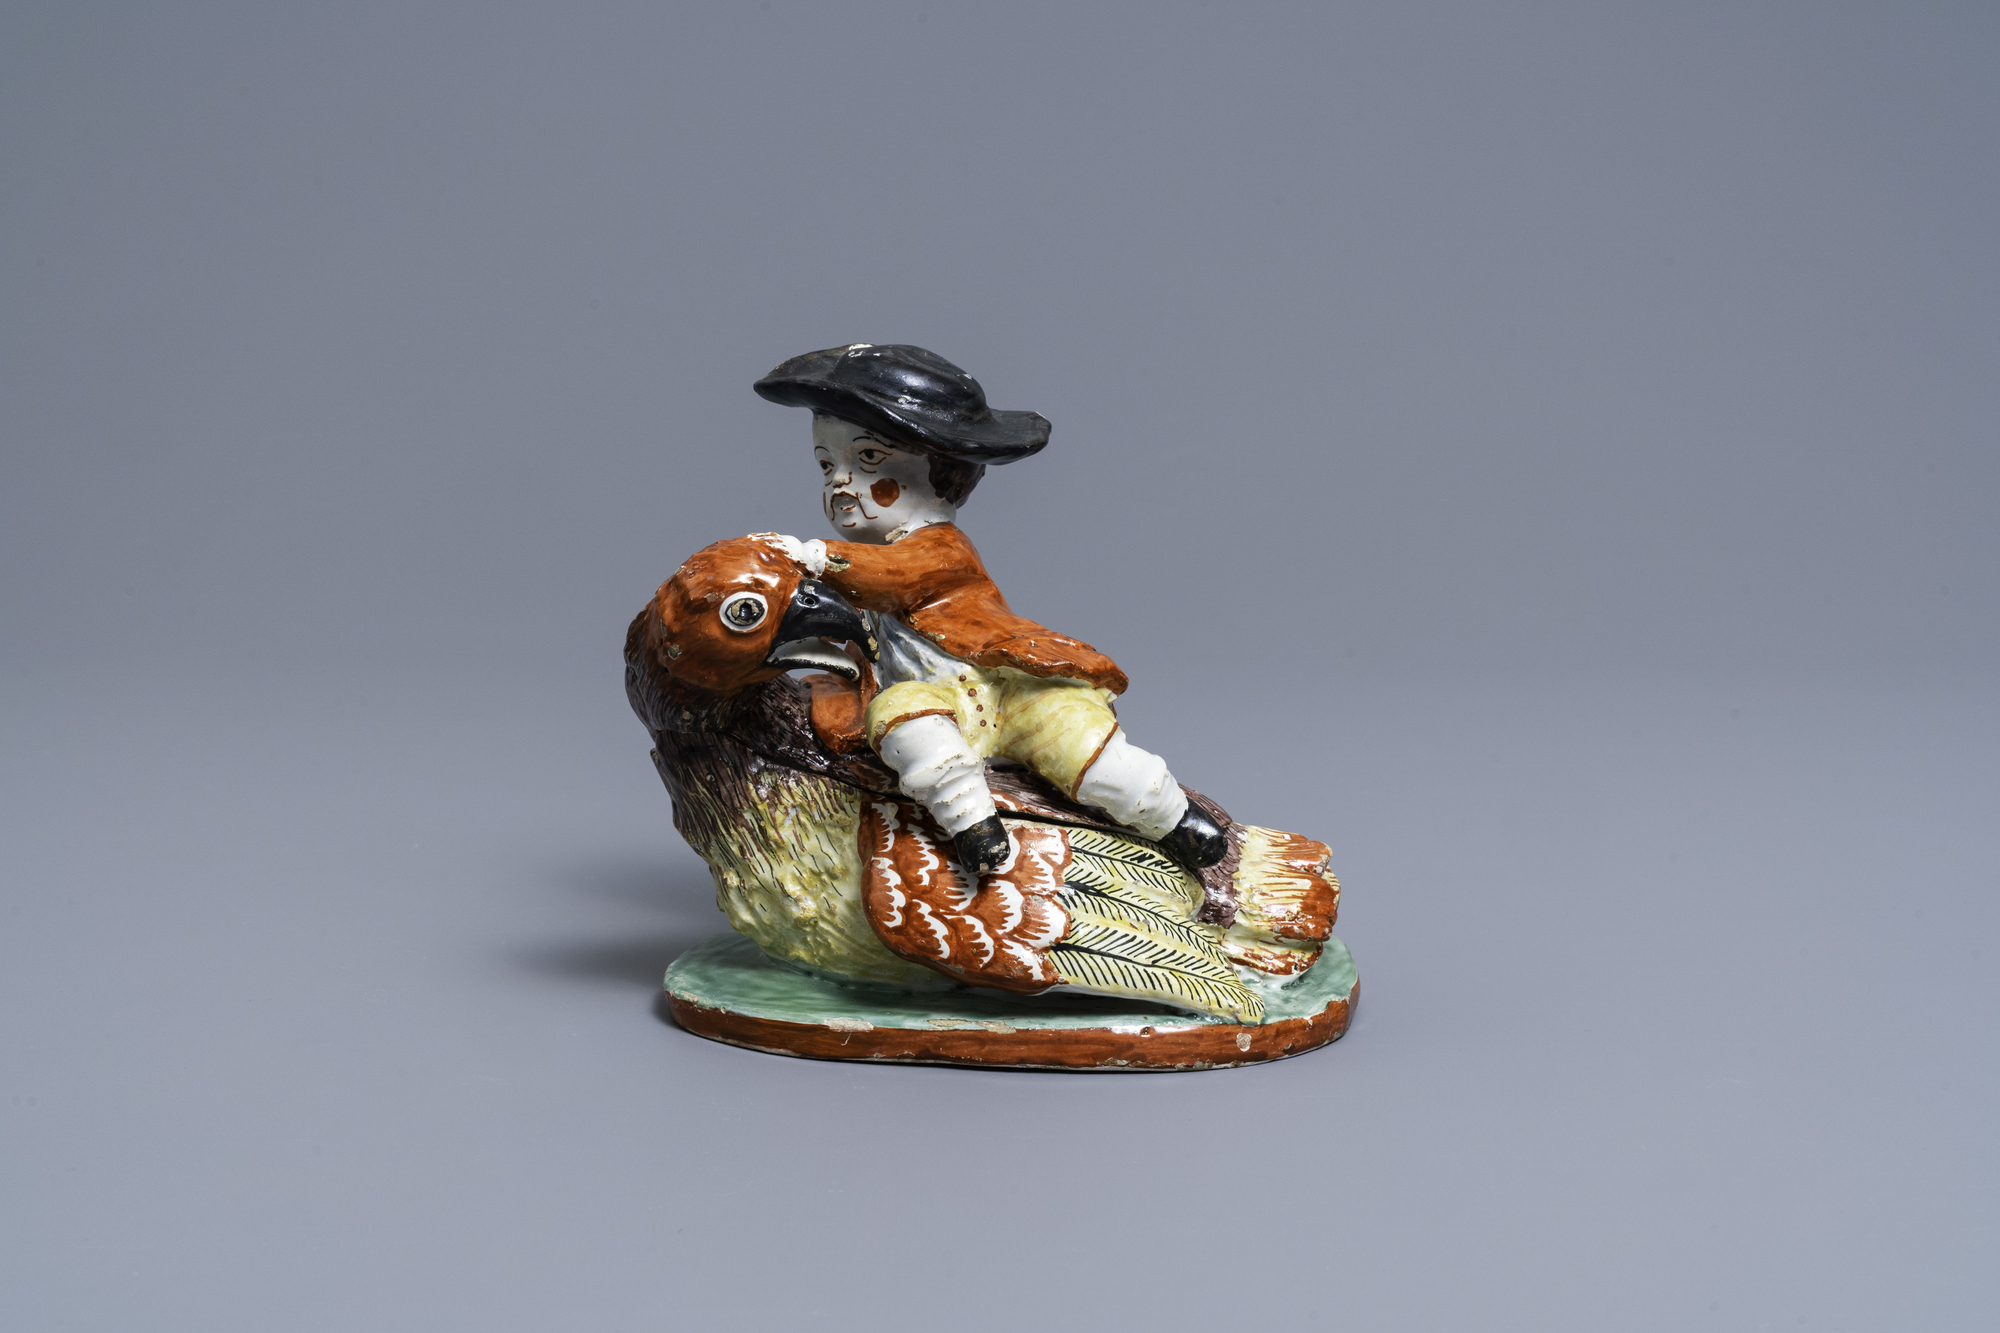 A polychrome Dutch Delft box and cover in the shape of a boy on a bird, 18th C.